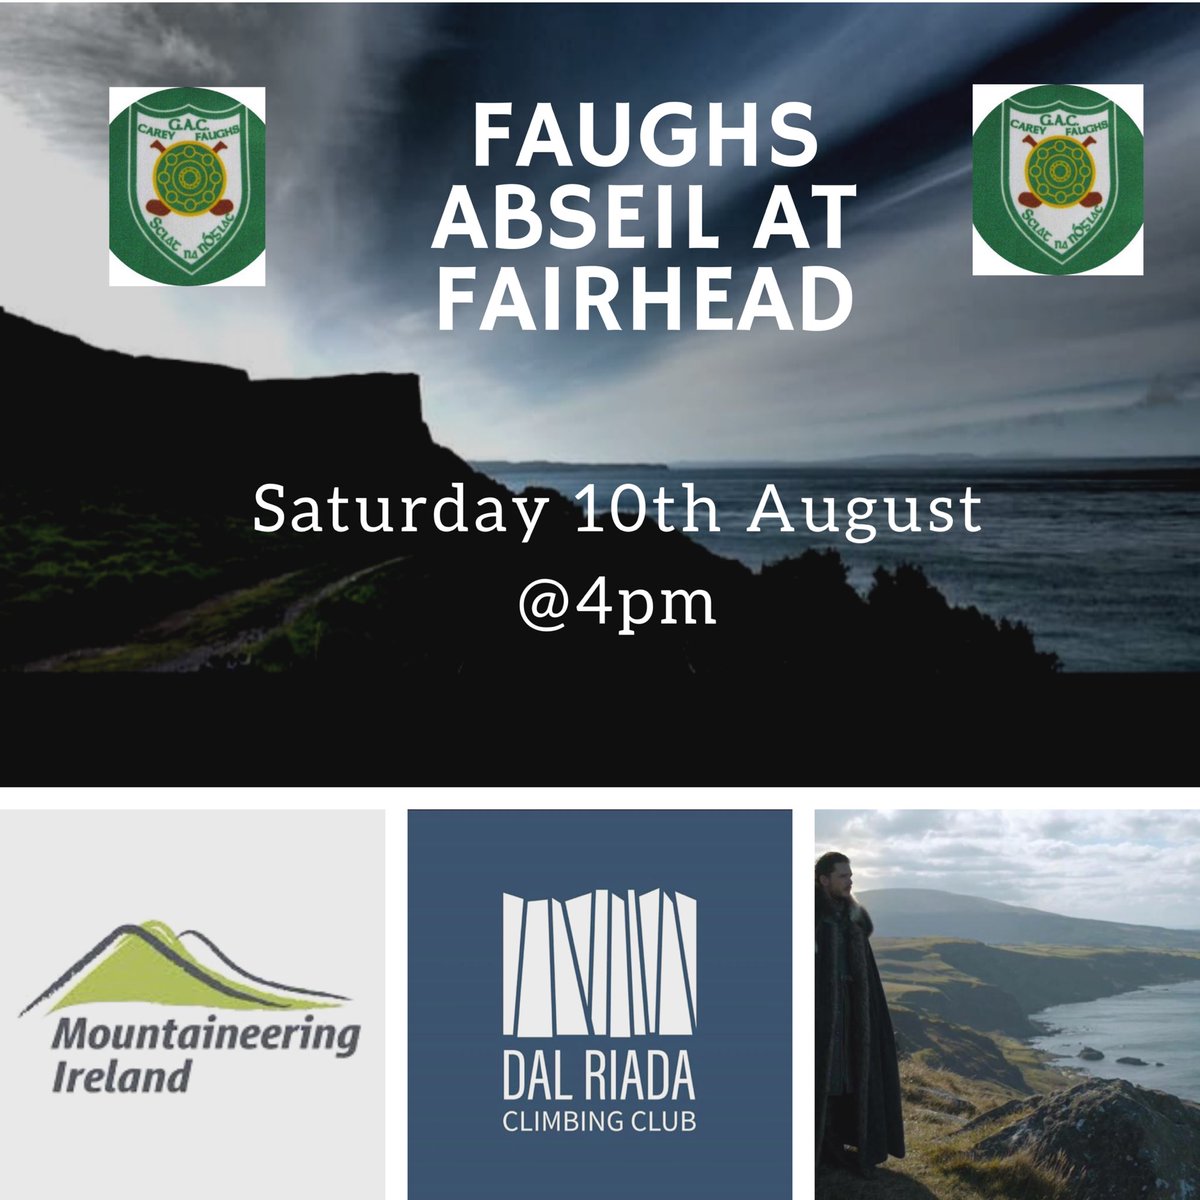 Carey Faughs Abseil at Fairhead A new and completely unique fundraiser for anyone that wants to try something different and take the chance to abseil the mighty cliffs of Fairhead! On Saturday the 10th August at approx 4pm, kindly sponsored by Hunter Kane! Details on Facebook!